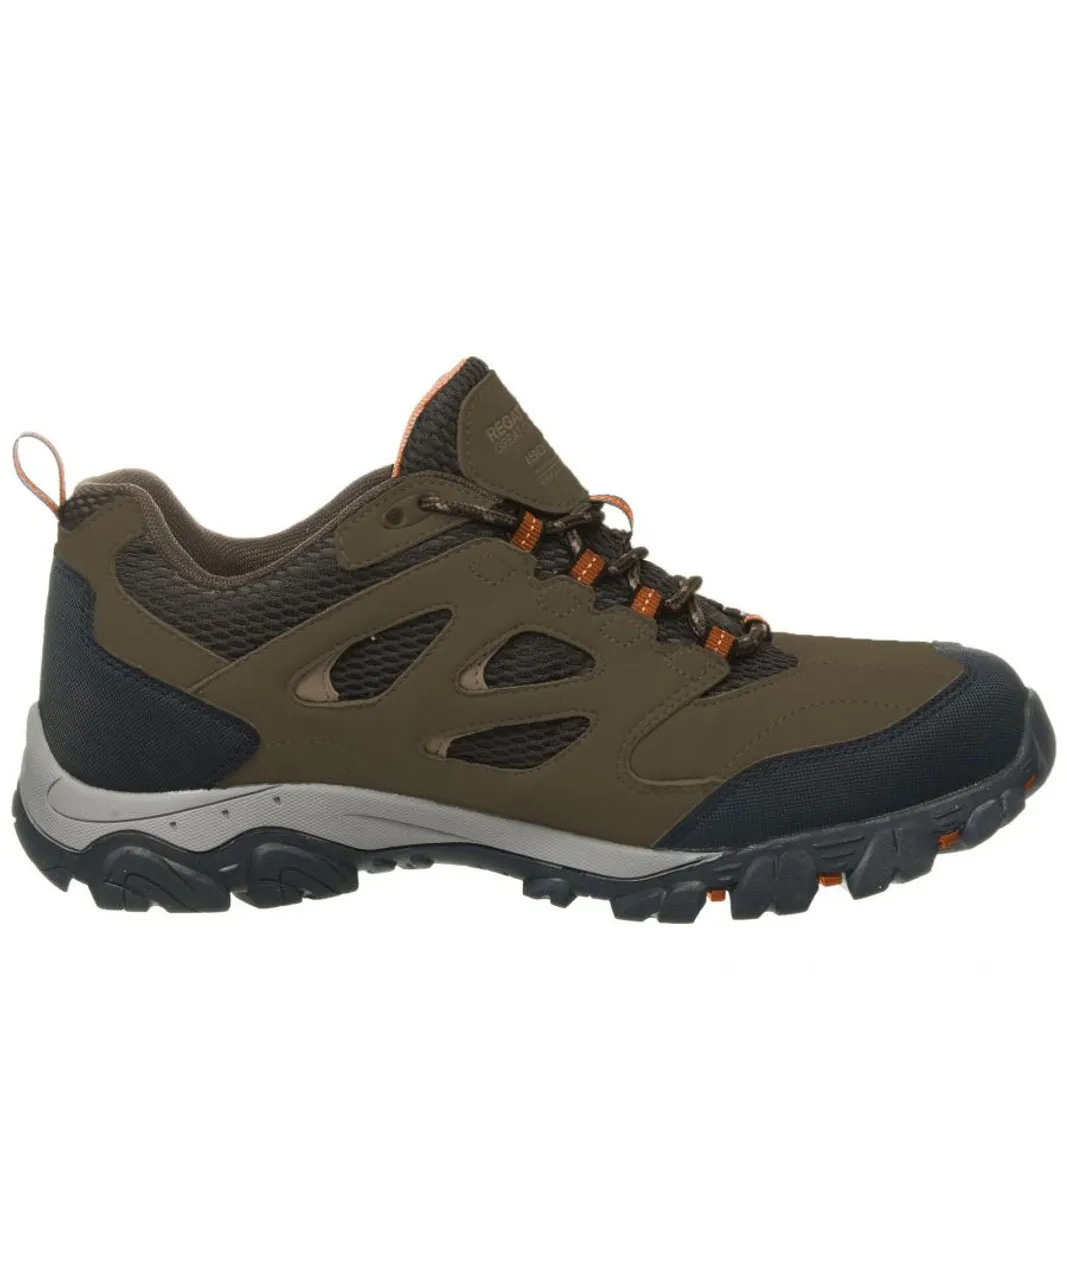 Regatta Mens Holcombe IEP Low Hiking Boots (Bayleaf/Burnt Umber) - Multicolour